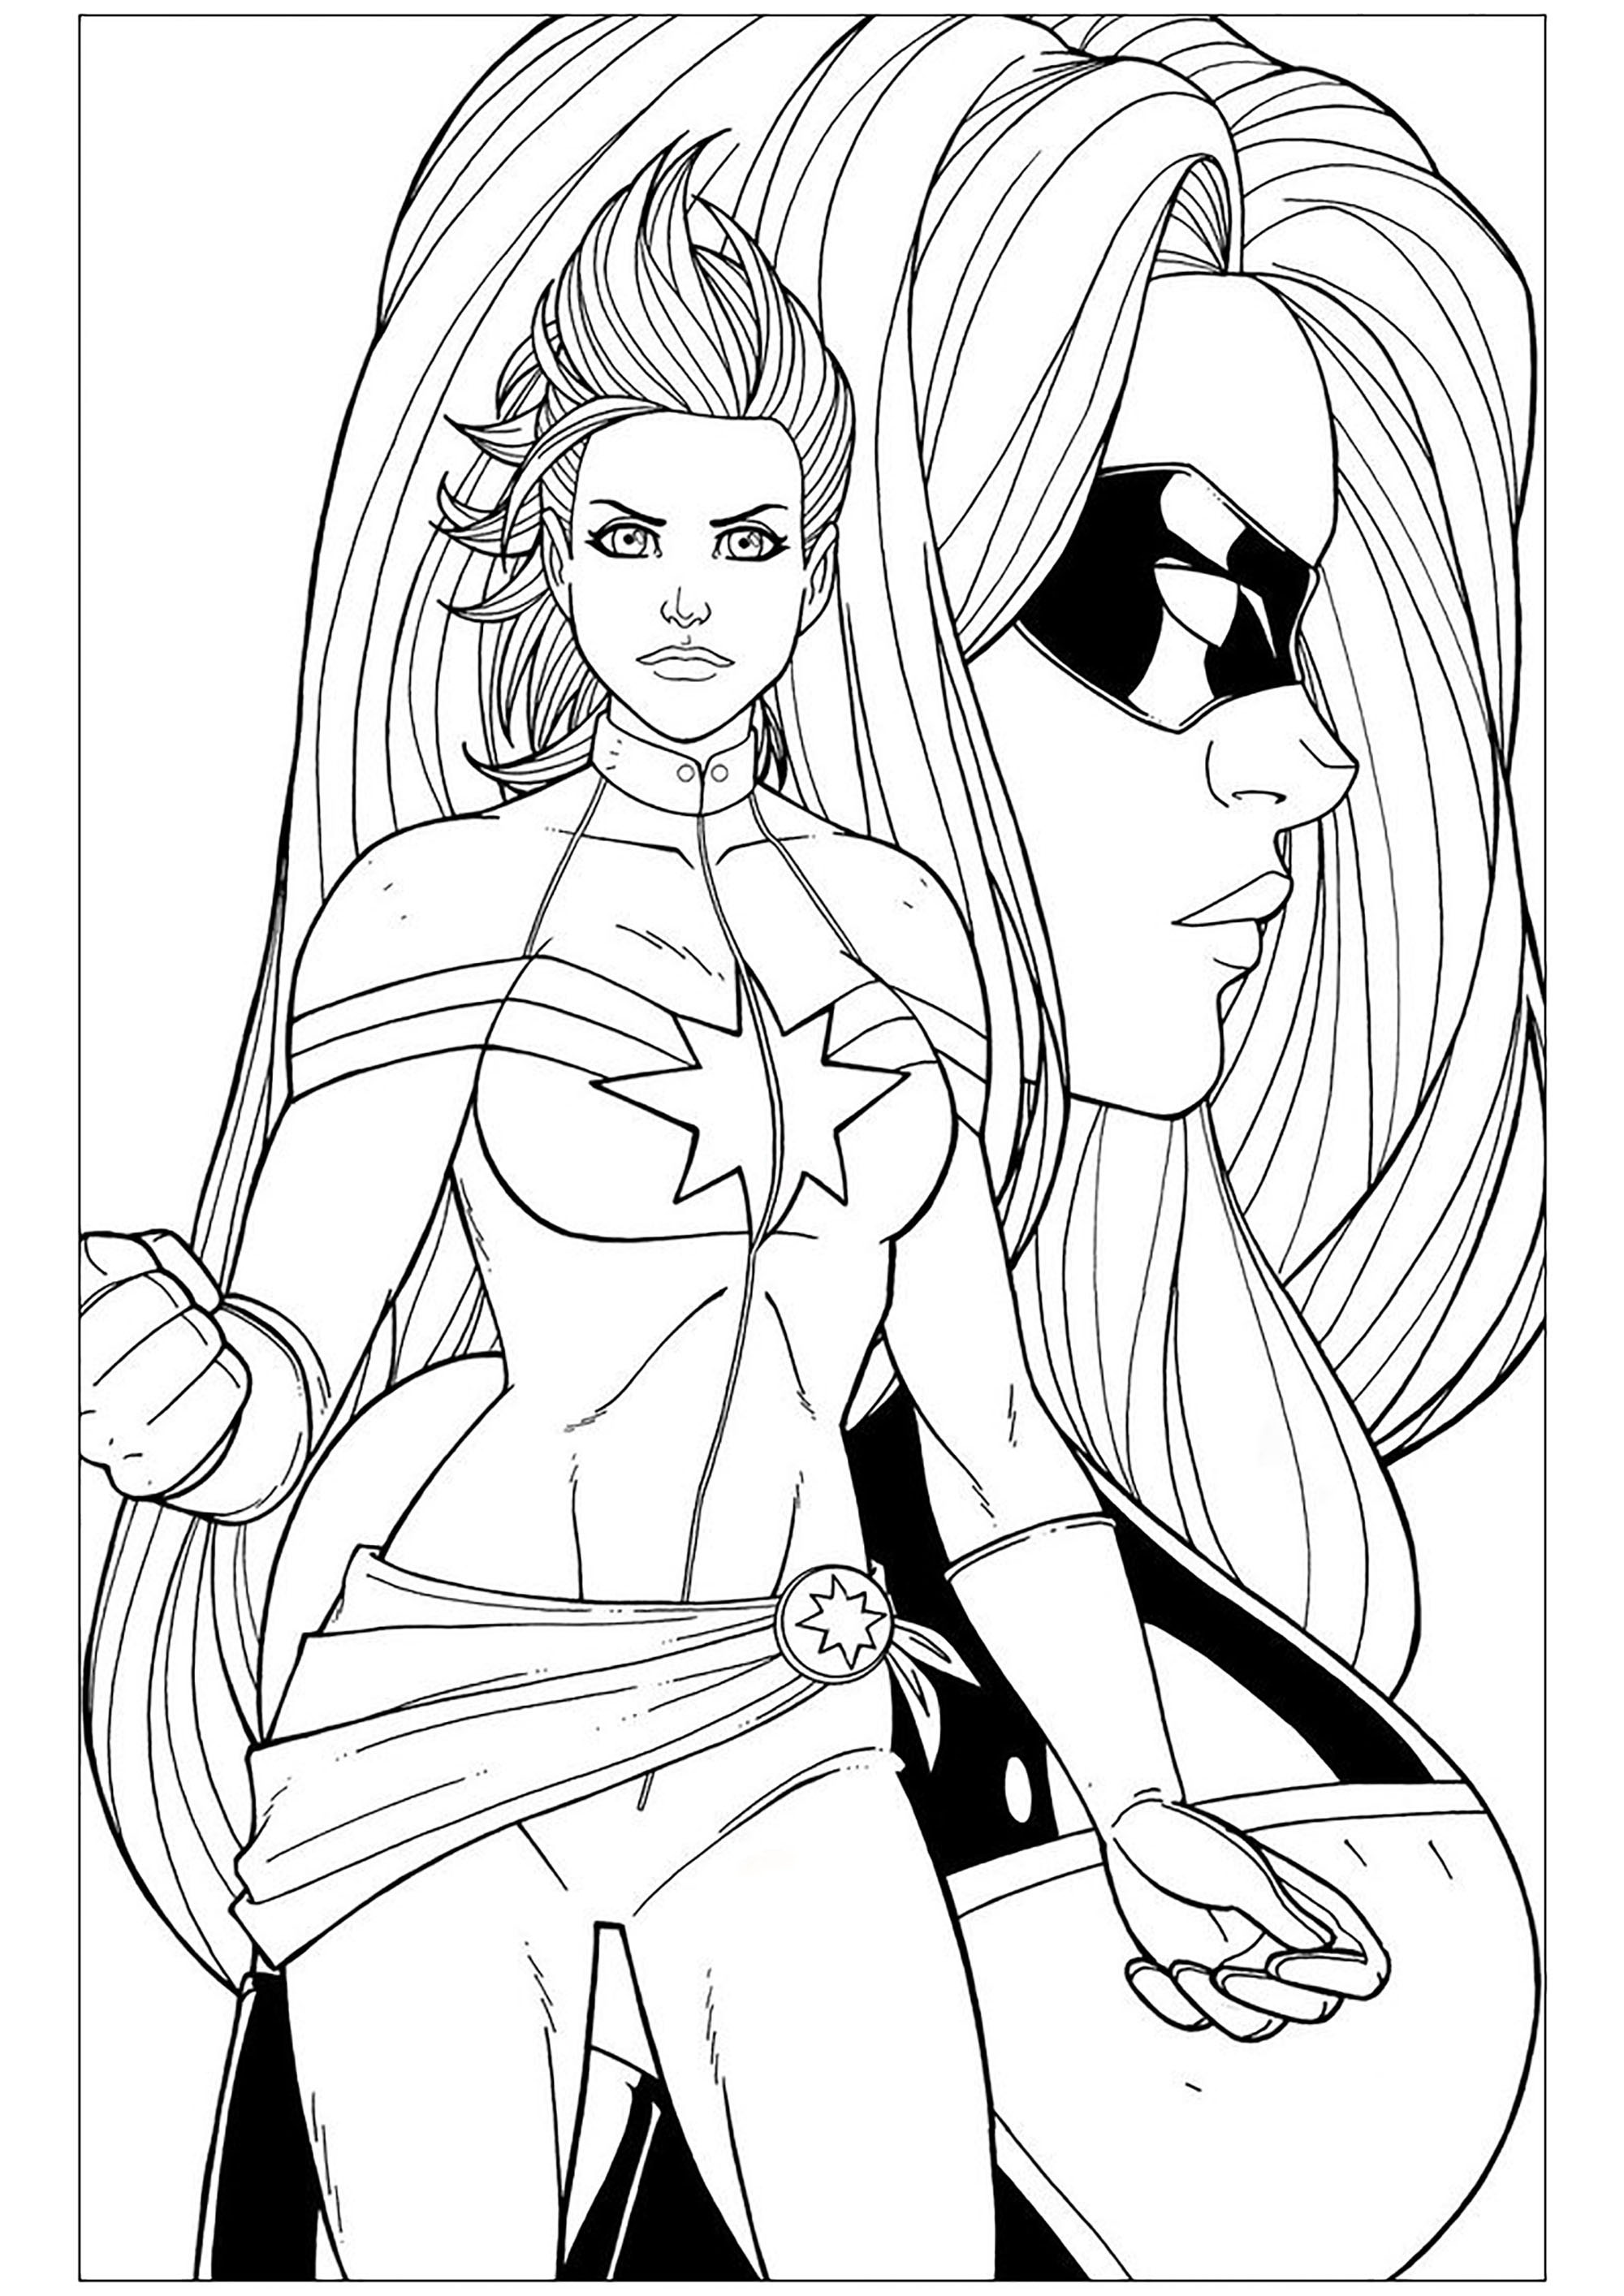 Captain Marvel Coloring Pages - Coloring Home